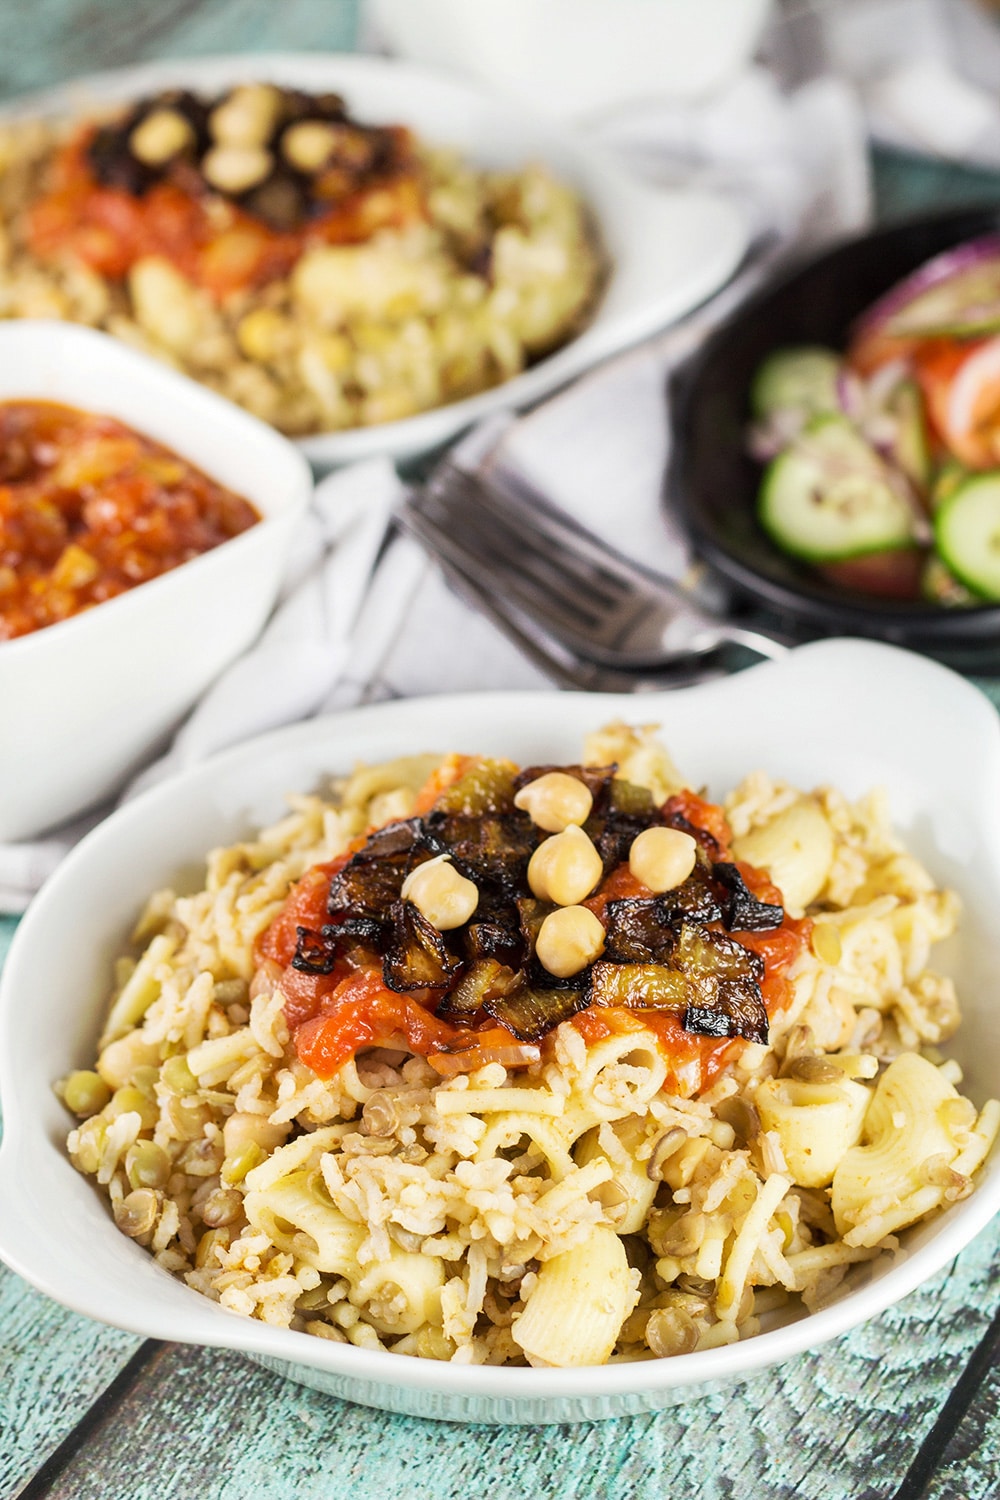 Koshari, or lentils and rice, is a national Egyptian dish. It also features pasta, chickpeas, fried onions, and a homemade tomato sauce. Healthy, filling, nutritious! #vegetarian #vegan| cookingtheglobe.com